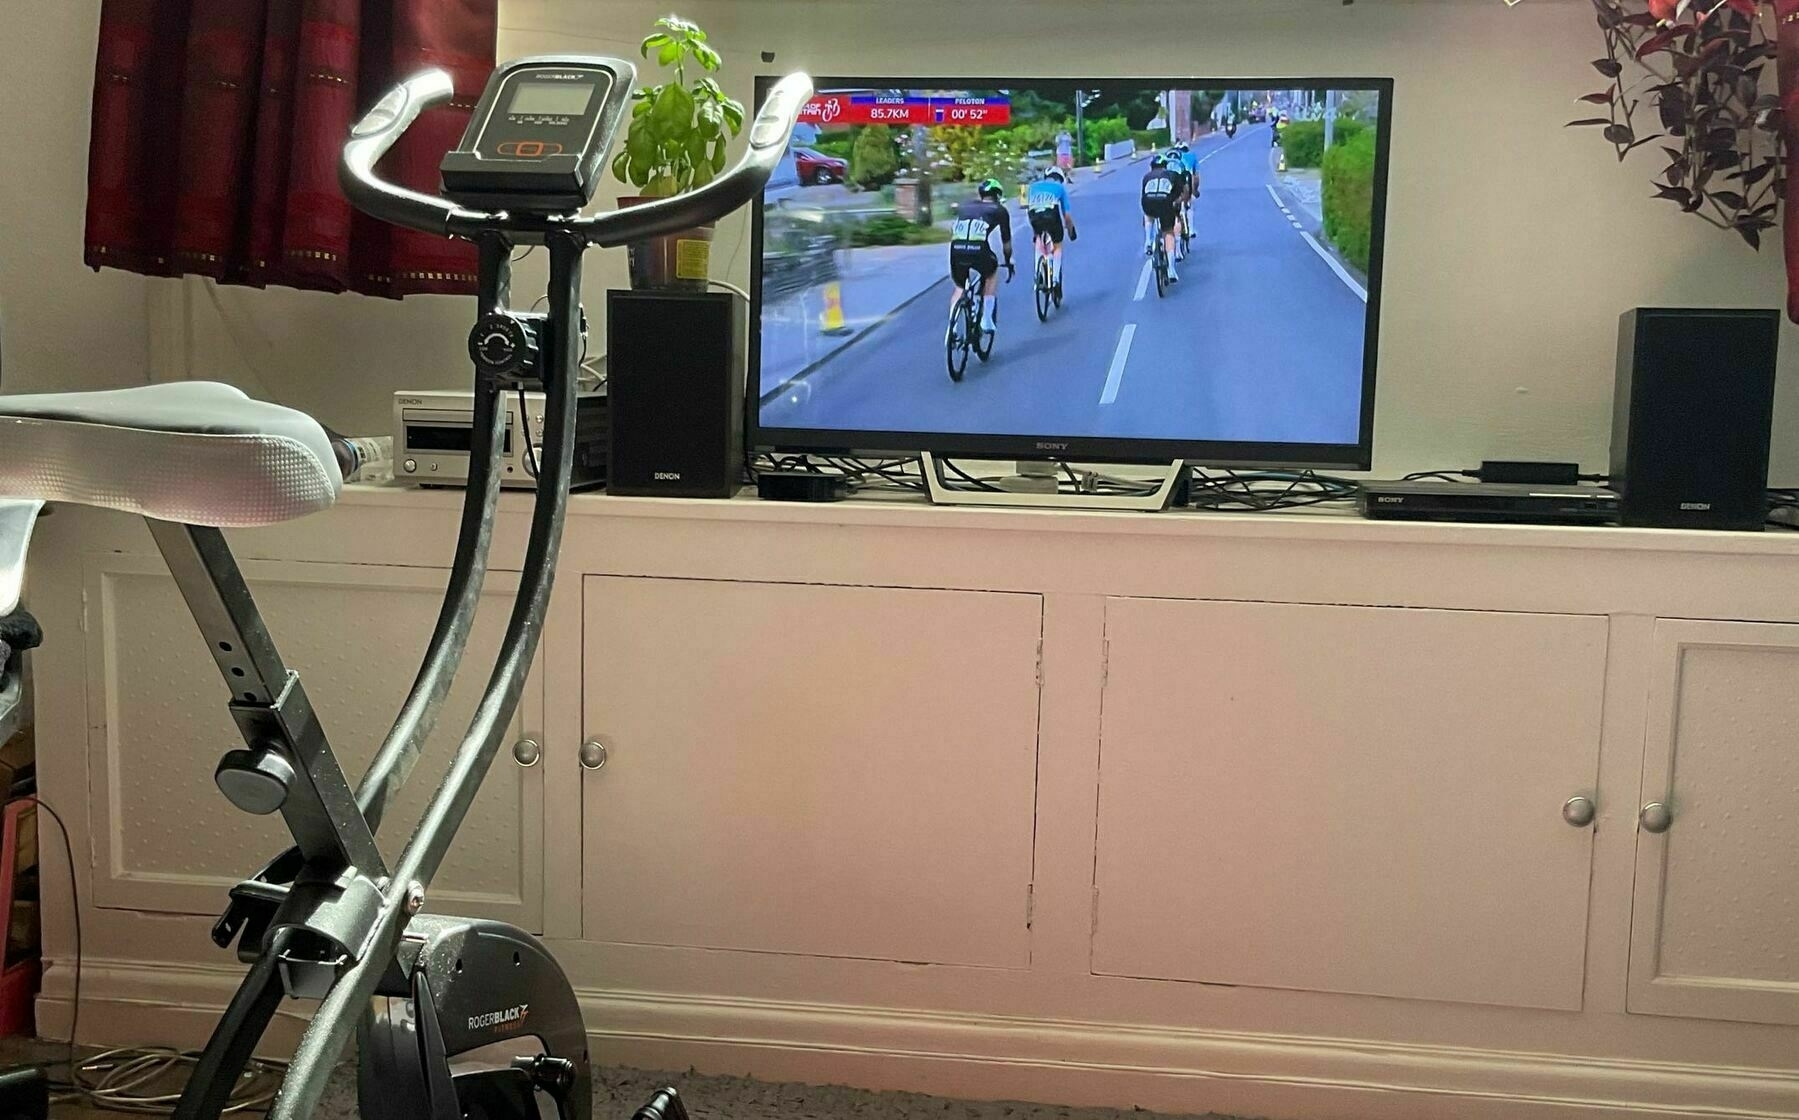 Exercise cycle in front of a TV showing the Tour of Britain cycle race